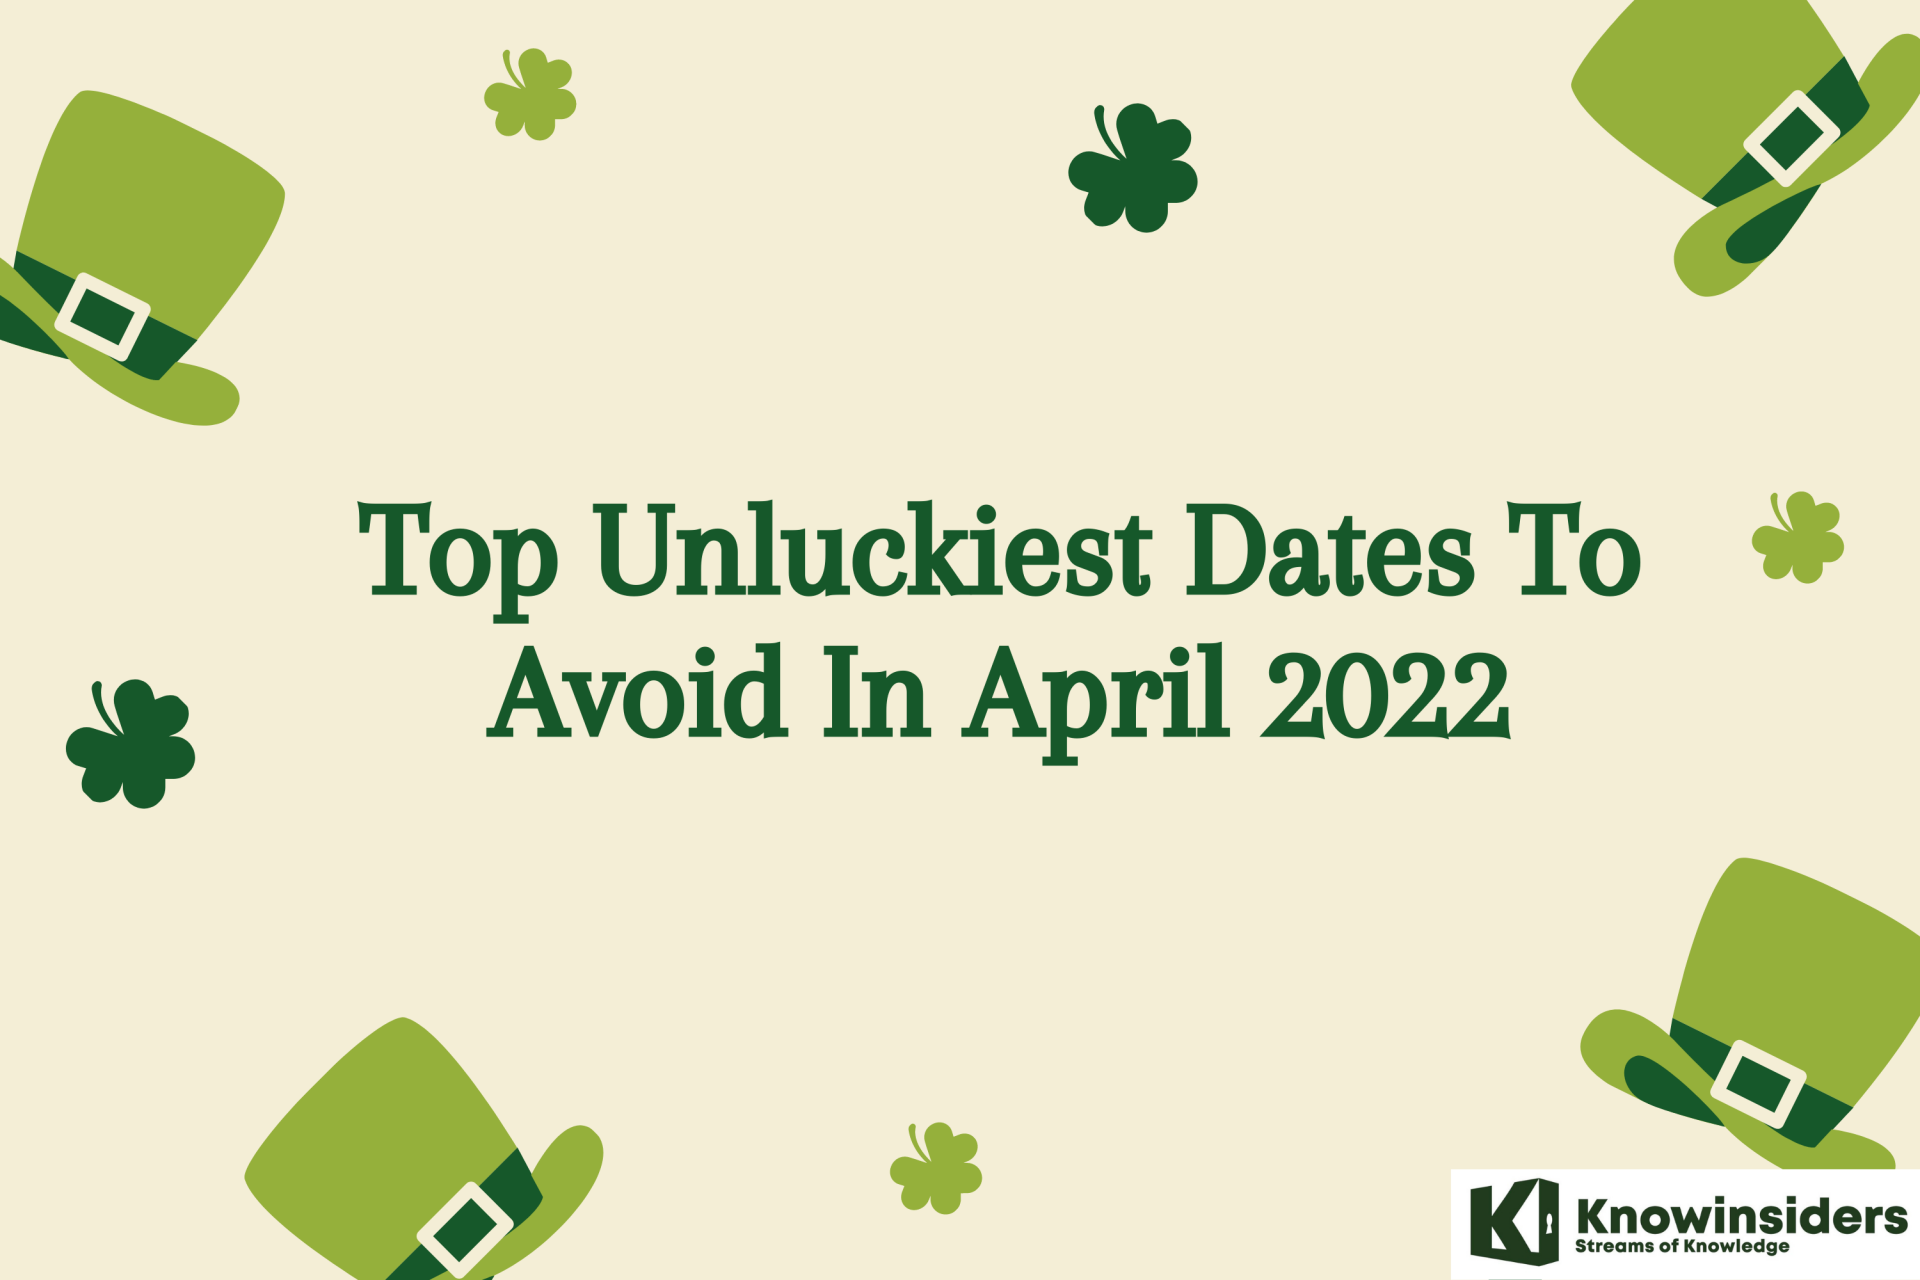 Top Unluckiest Dates To Avoid In April 2022